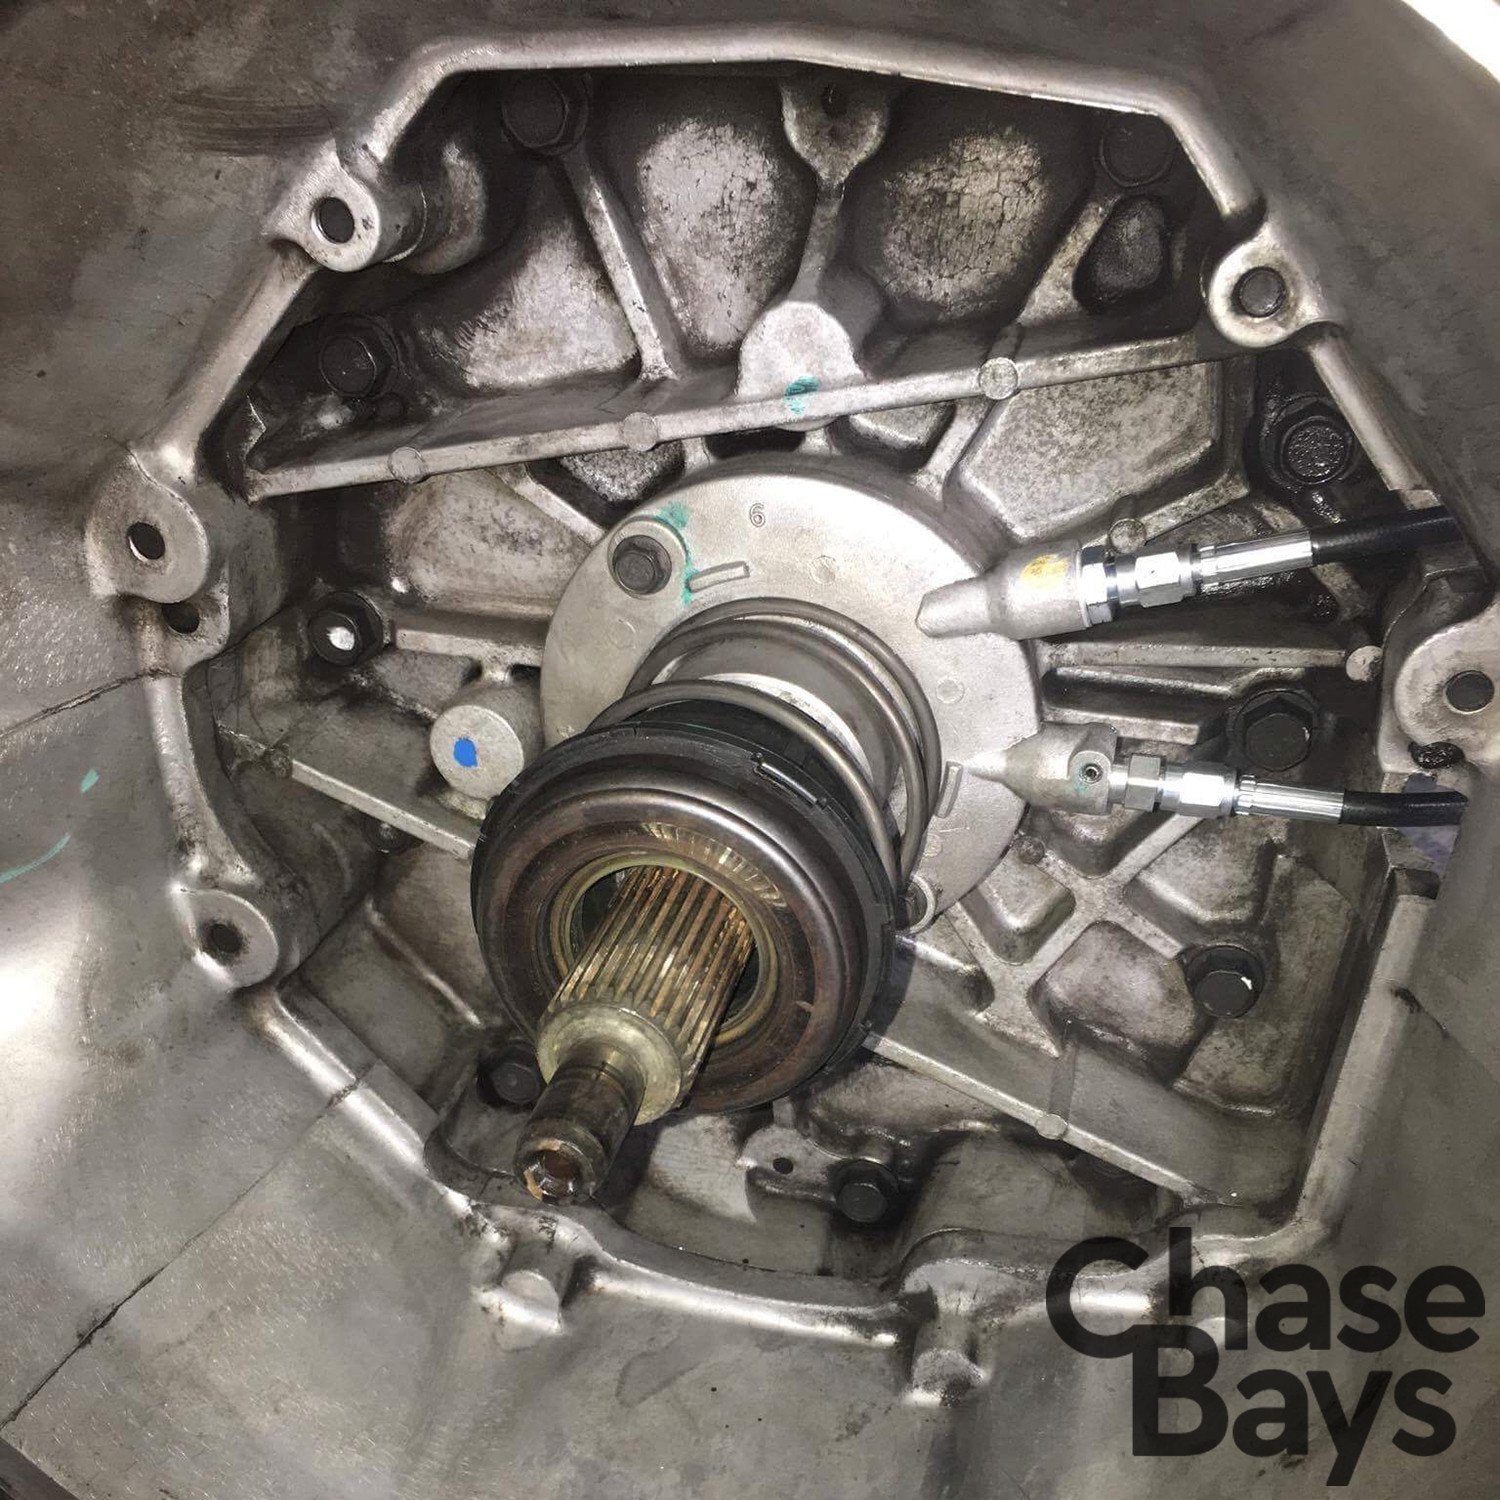 CHASE BAYS Nissan Silvia S13 S14 clutch line with GM LS1 T56 gearbox - PARTS33 GmbH